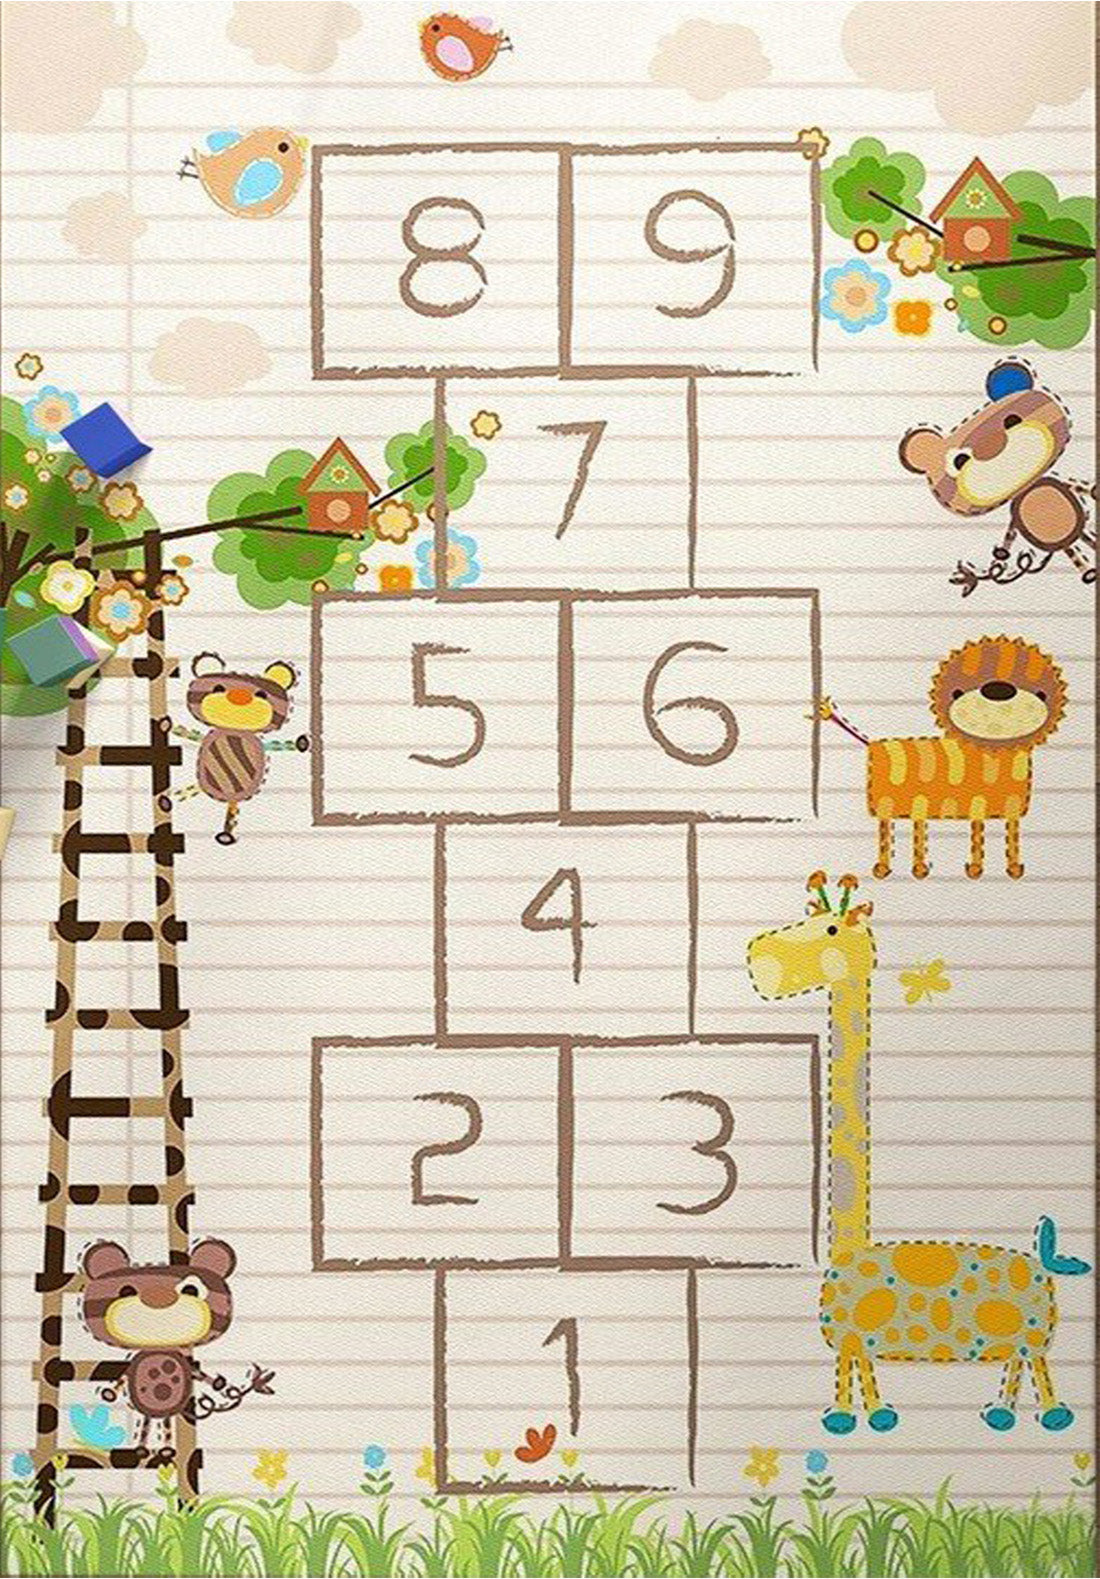 Tremont Flatweave Hopscotch Game Numbers Kids Area Rug.